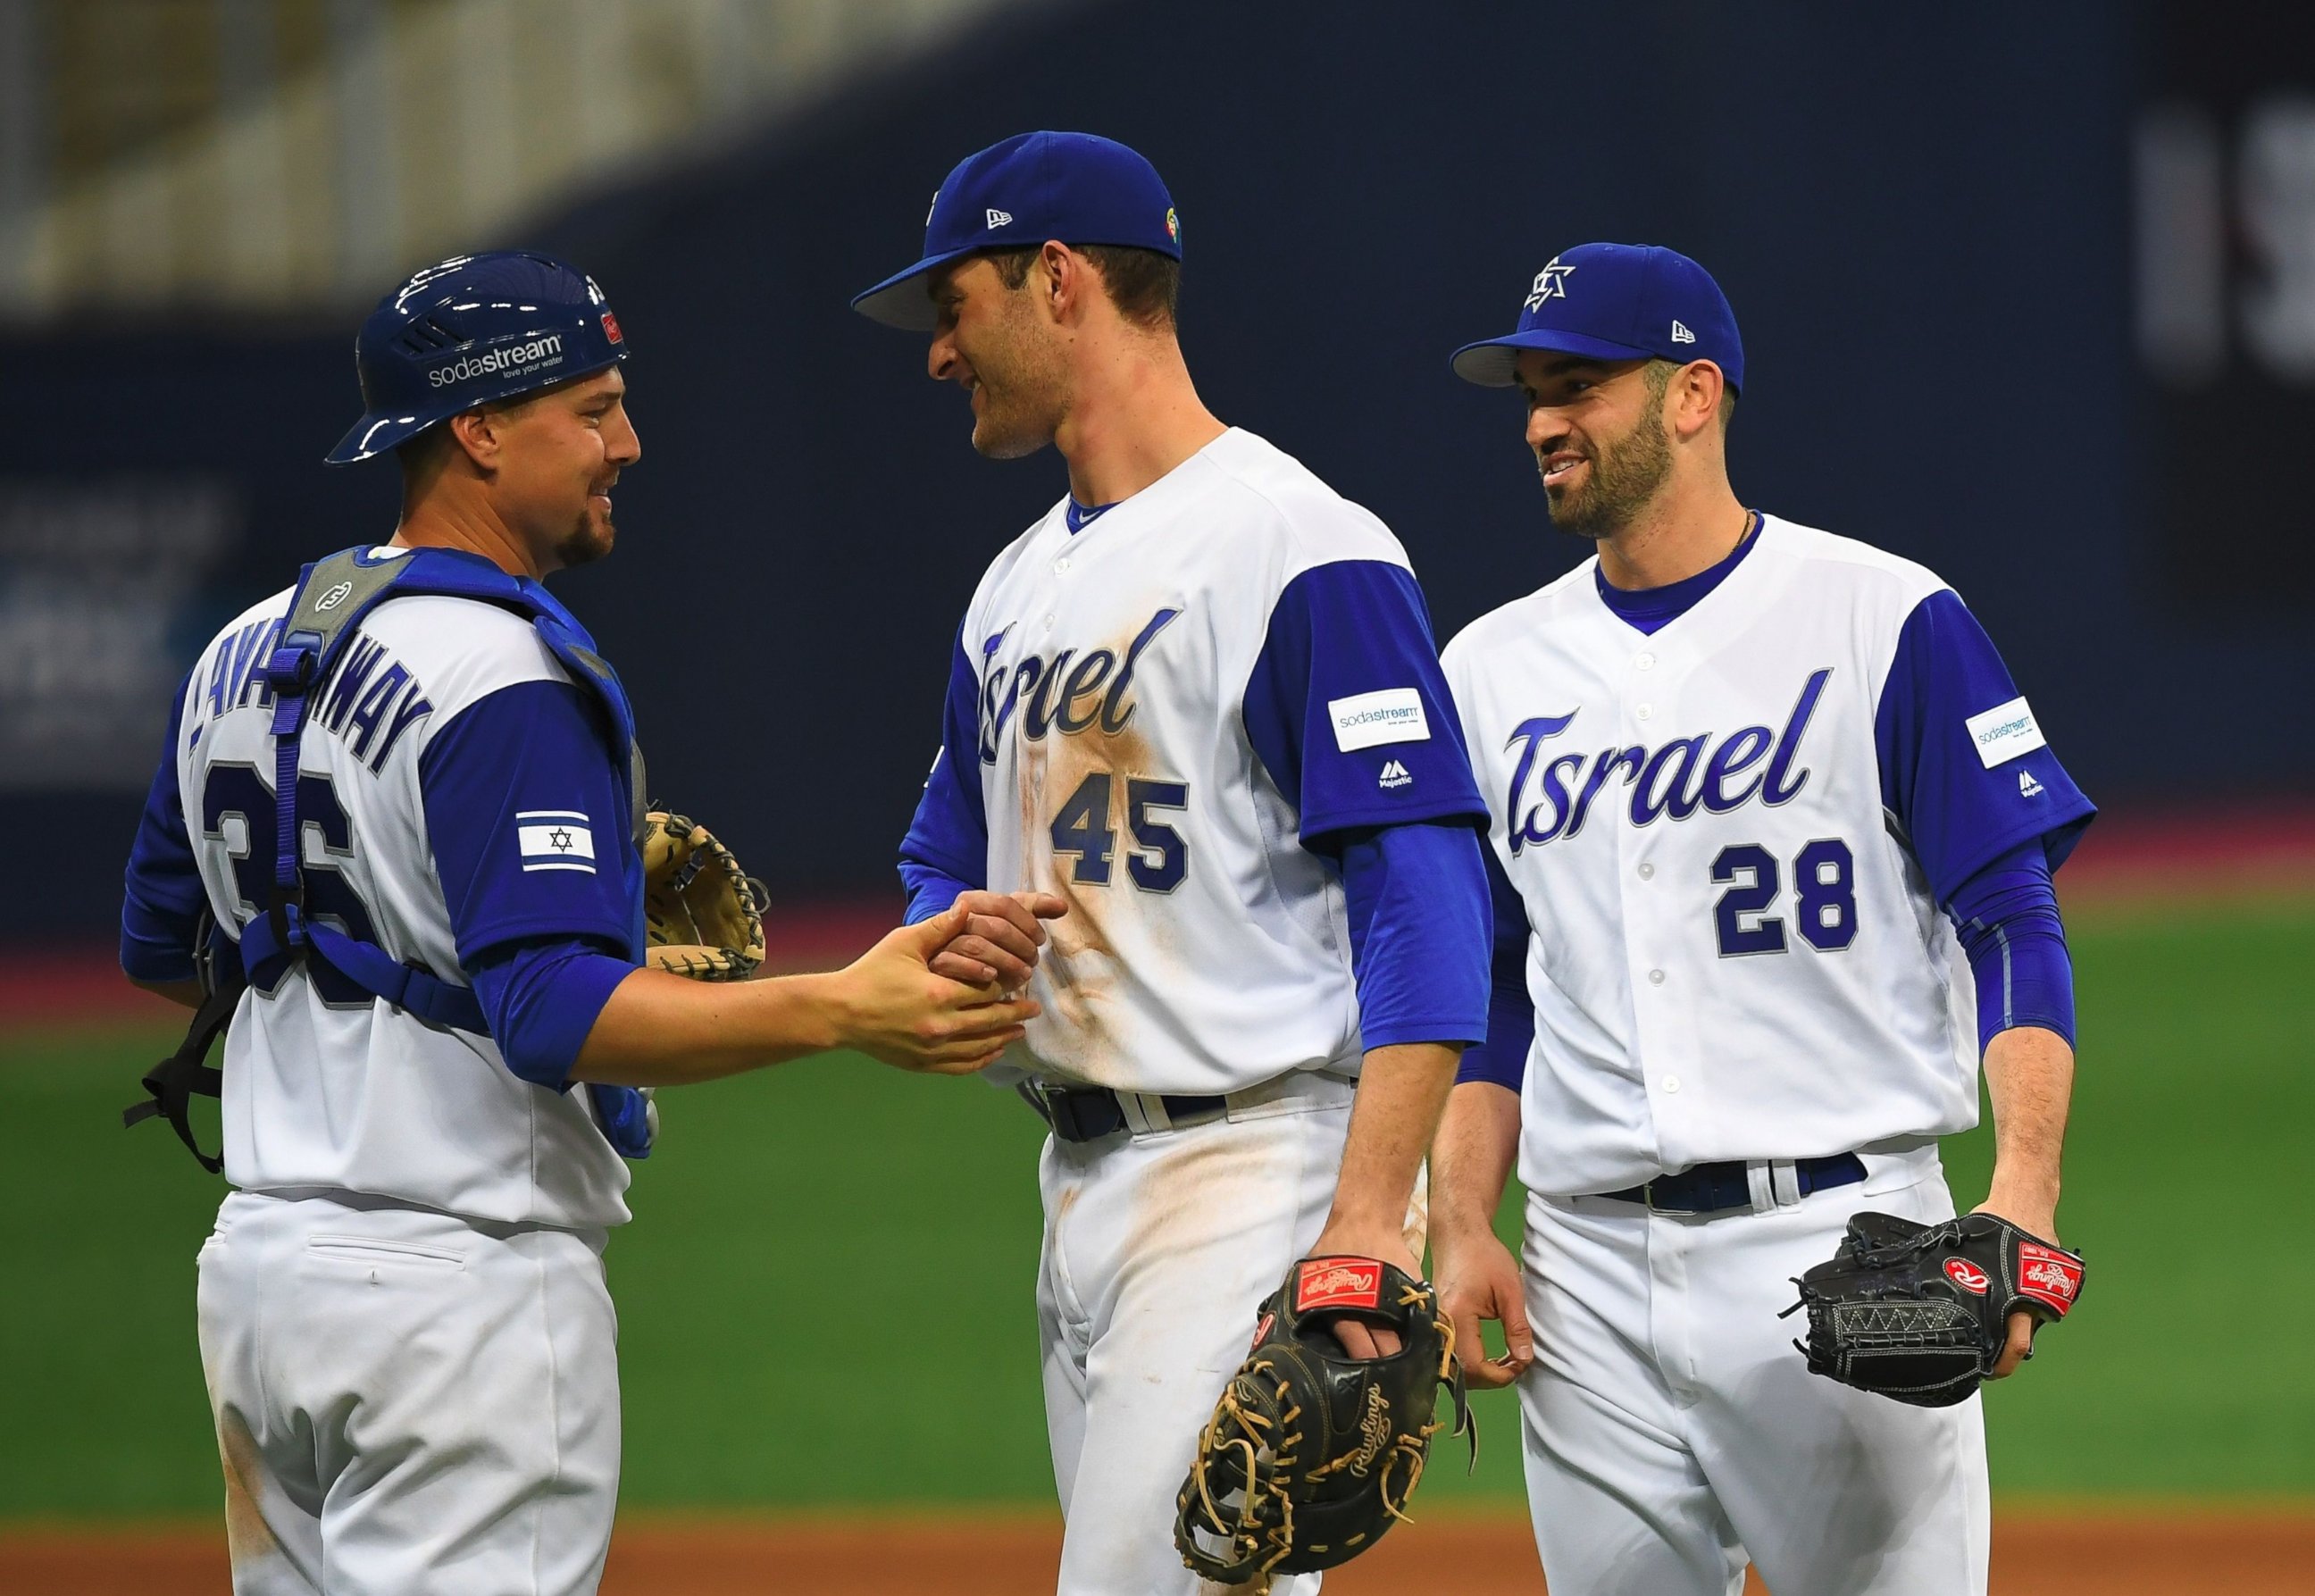 PHOTO: Catcher Ryan Lavarnway of Israel celebrates a victory over the Netherlands with infielder Nate Freiman and pitcher Josh Zeid after their first round game of the World Baseball Classic at Gocheok Sky Dome in Seoul on March 9, 2017.